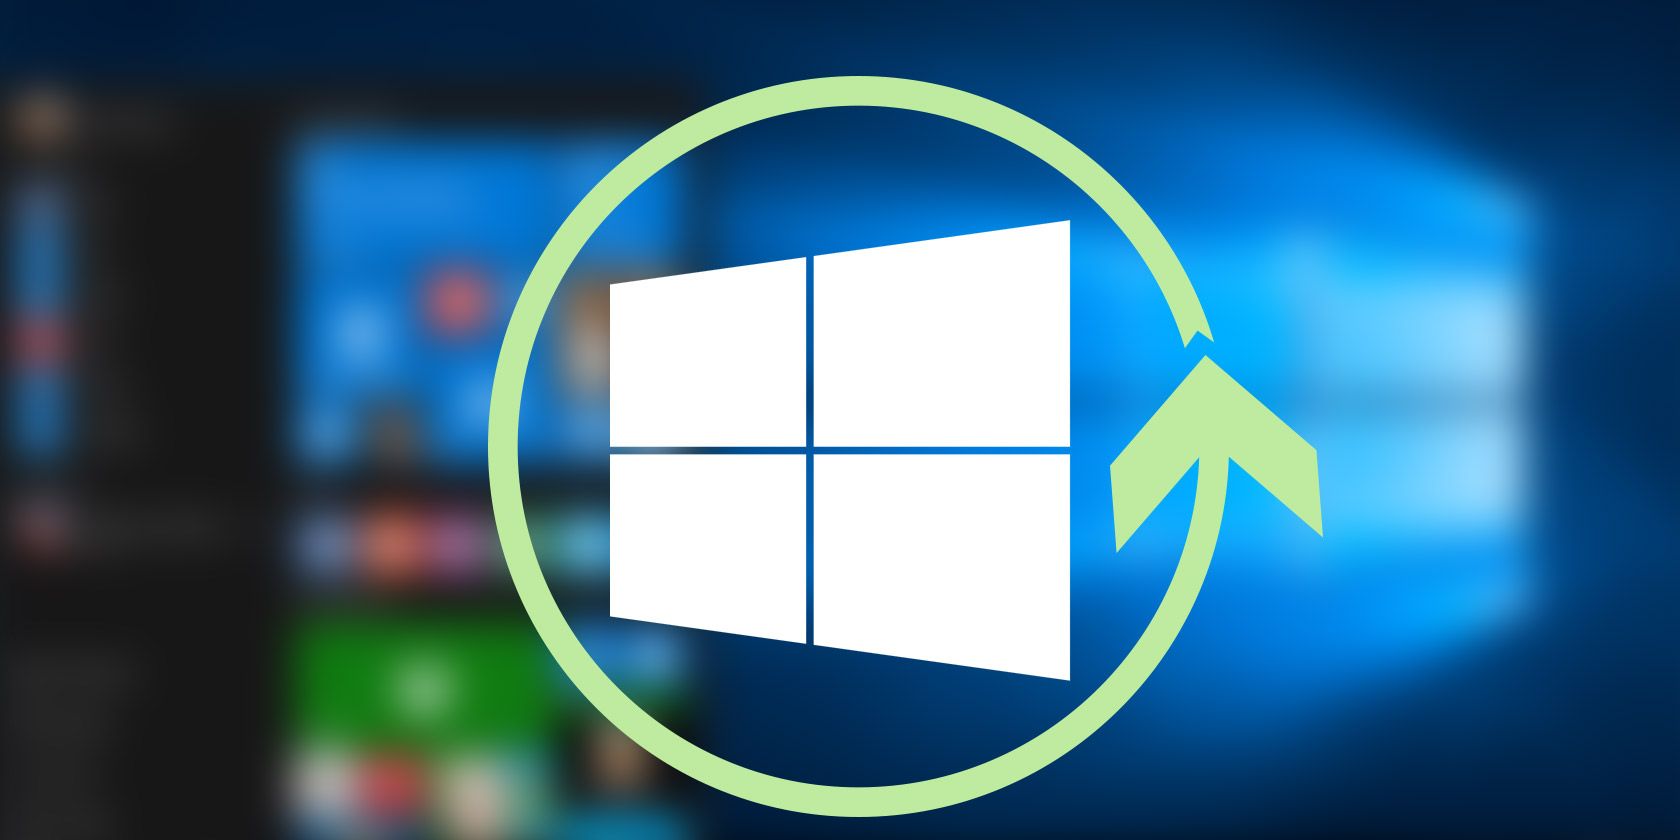 windows 10 media creation tool checking for updates